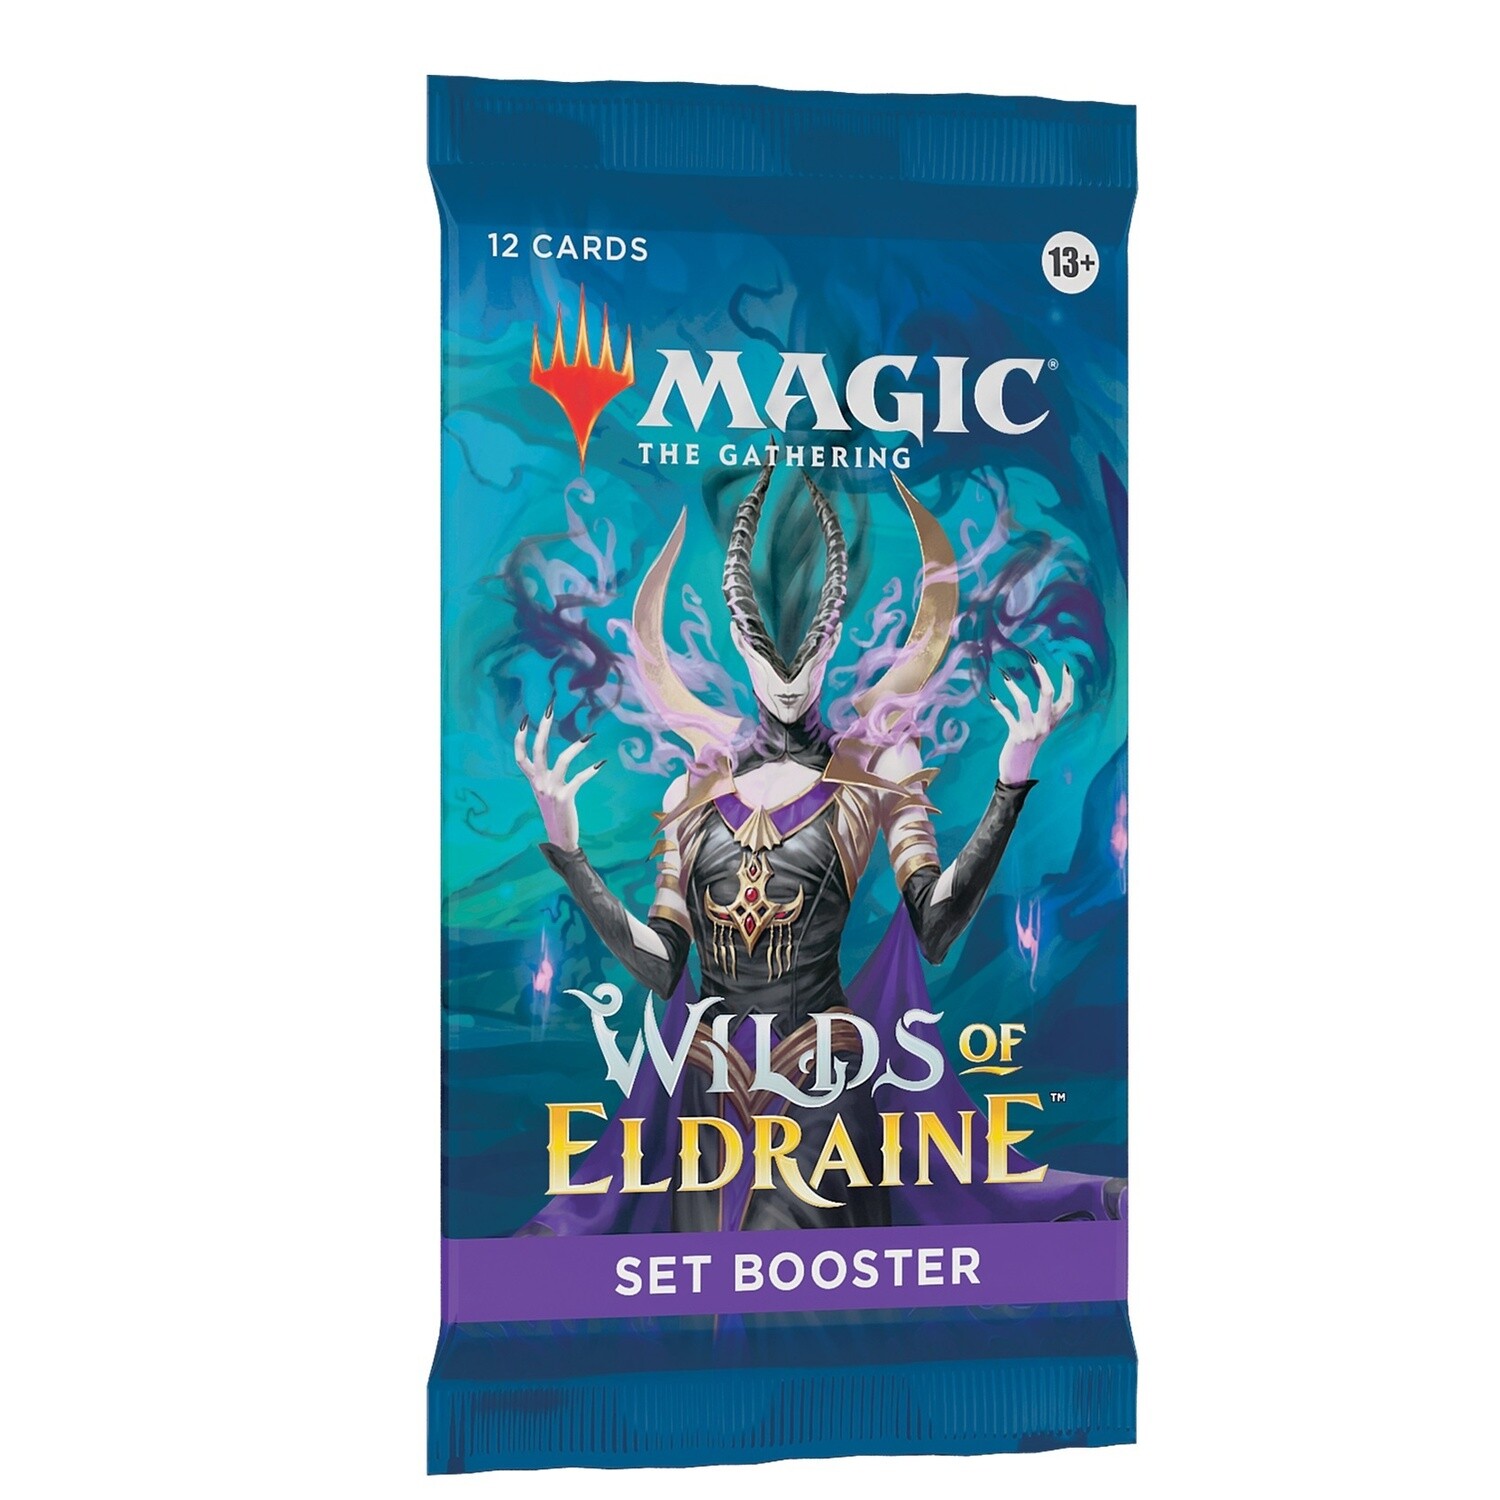 Magic: The Gathering Wilds of Eldraine Set Booster Pack